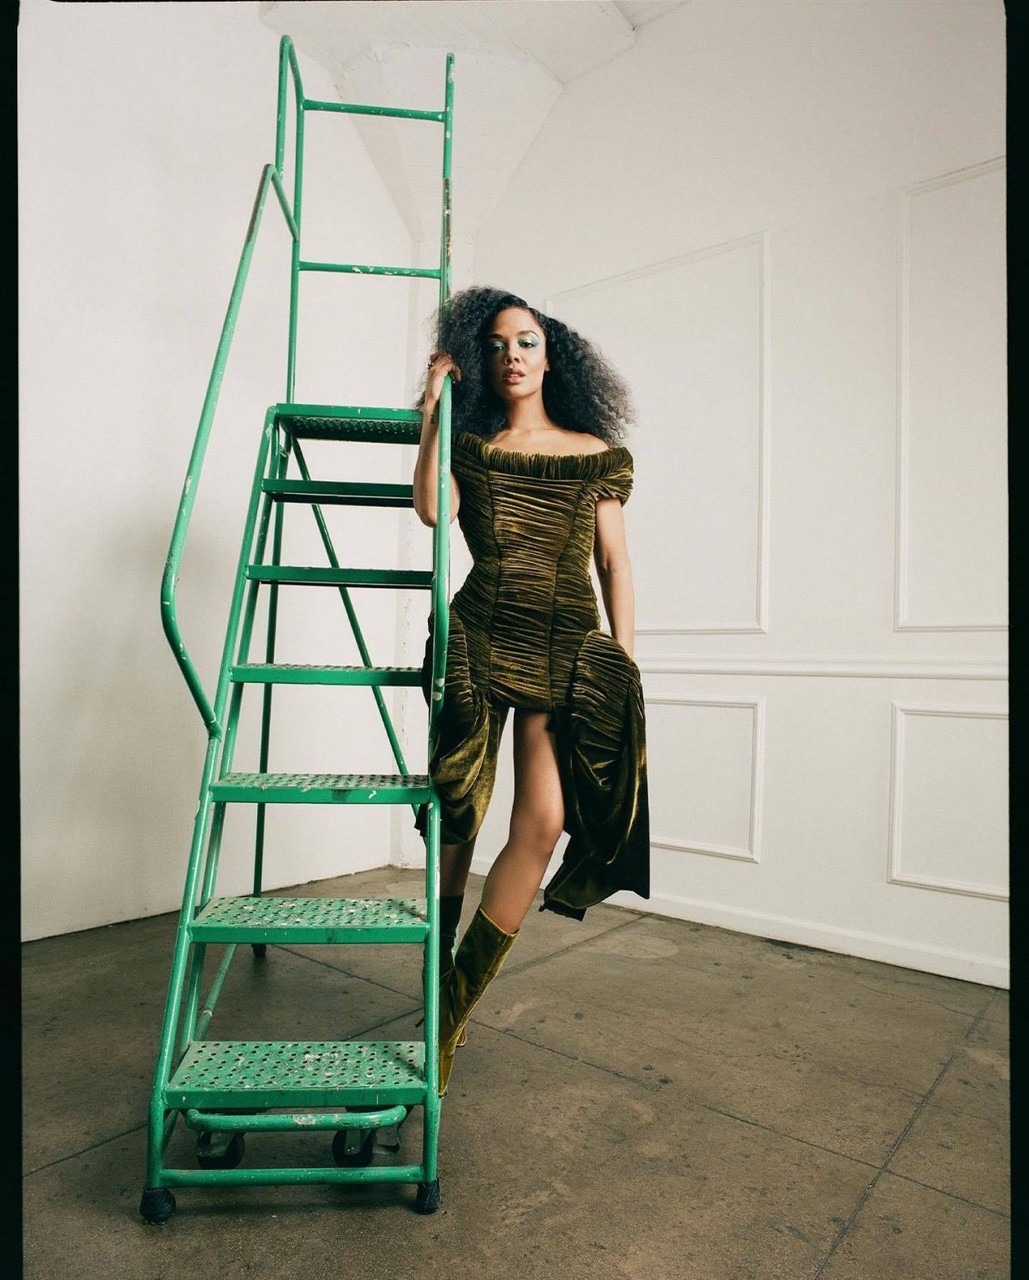 Tessa Thompson For Who What Wear December